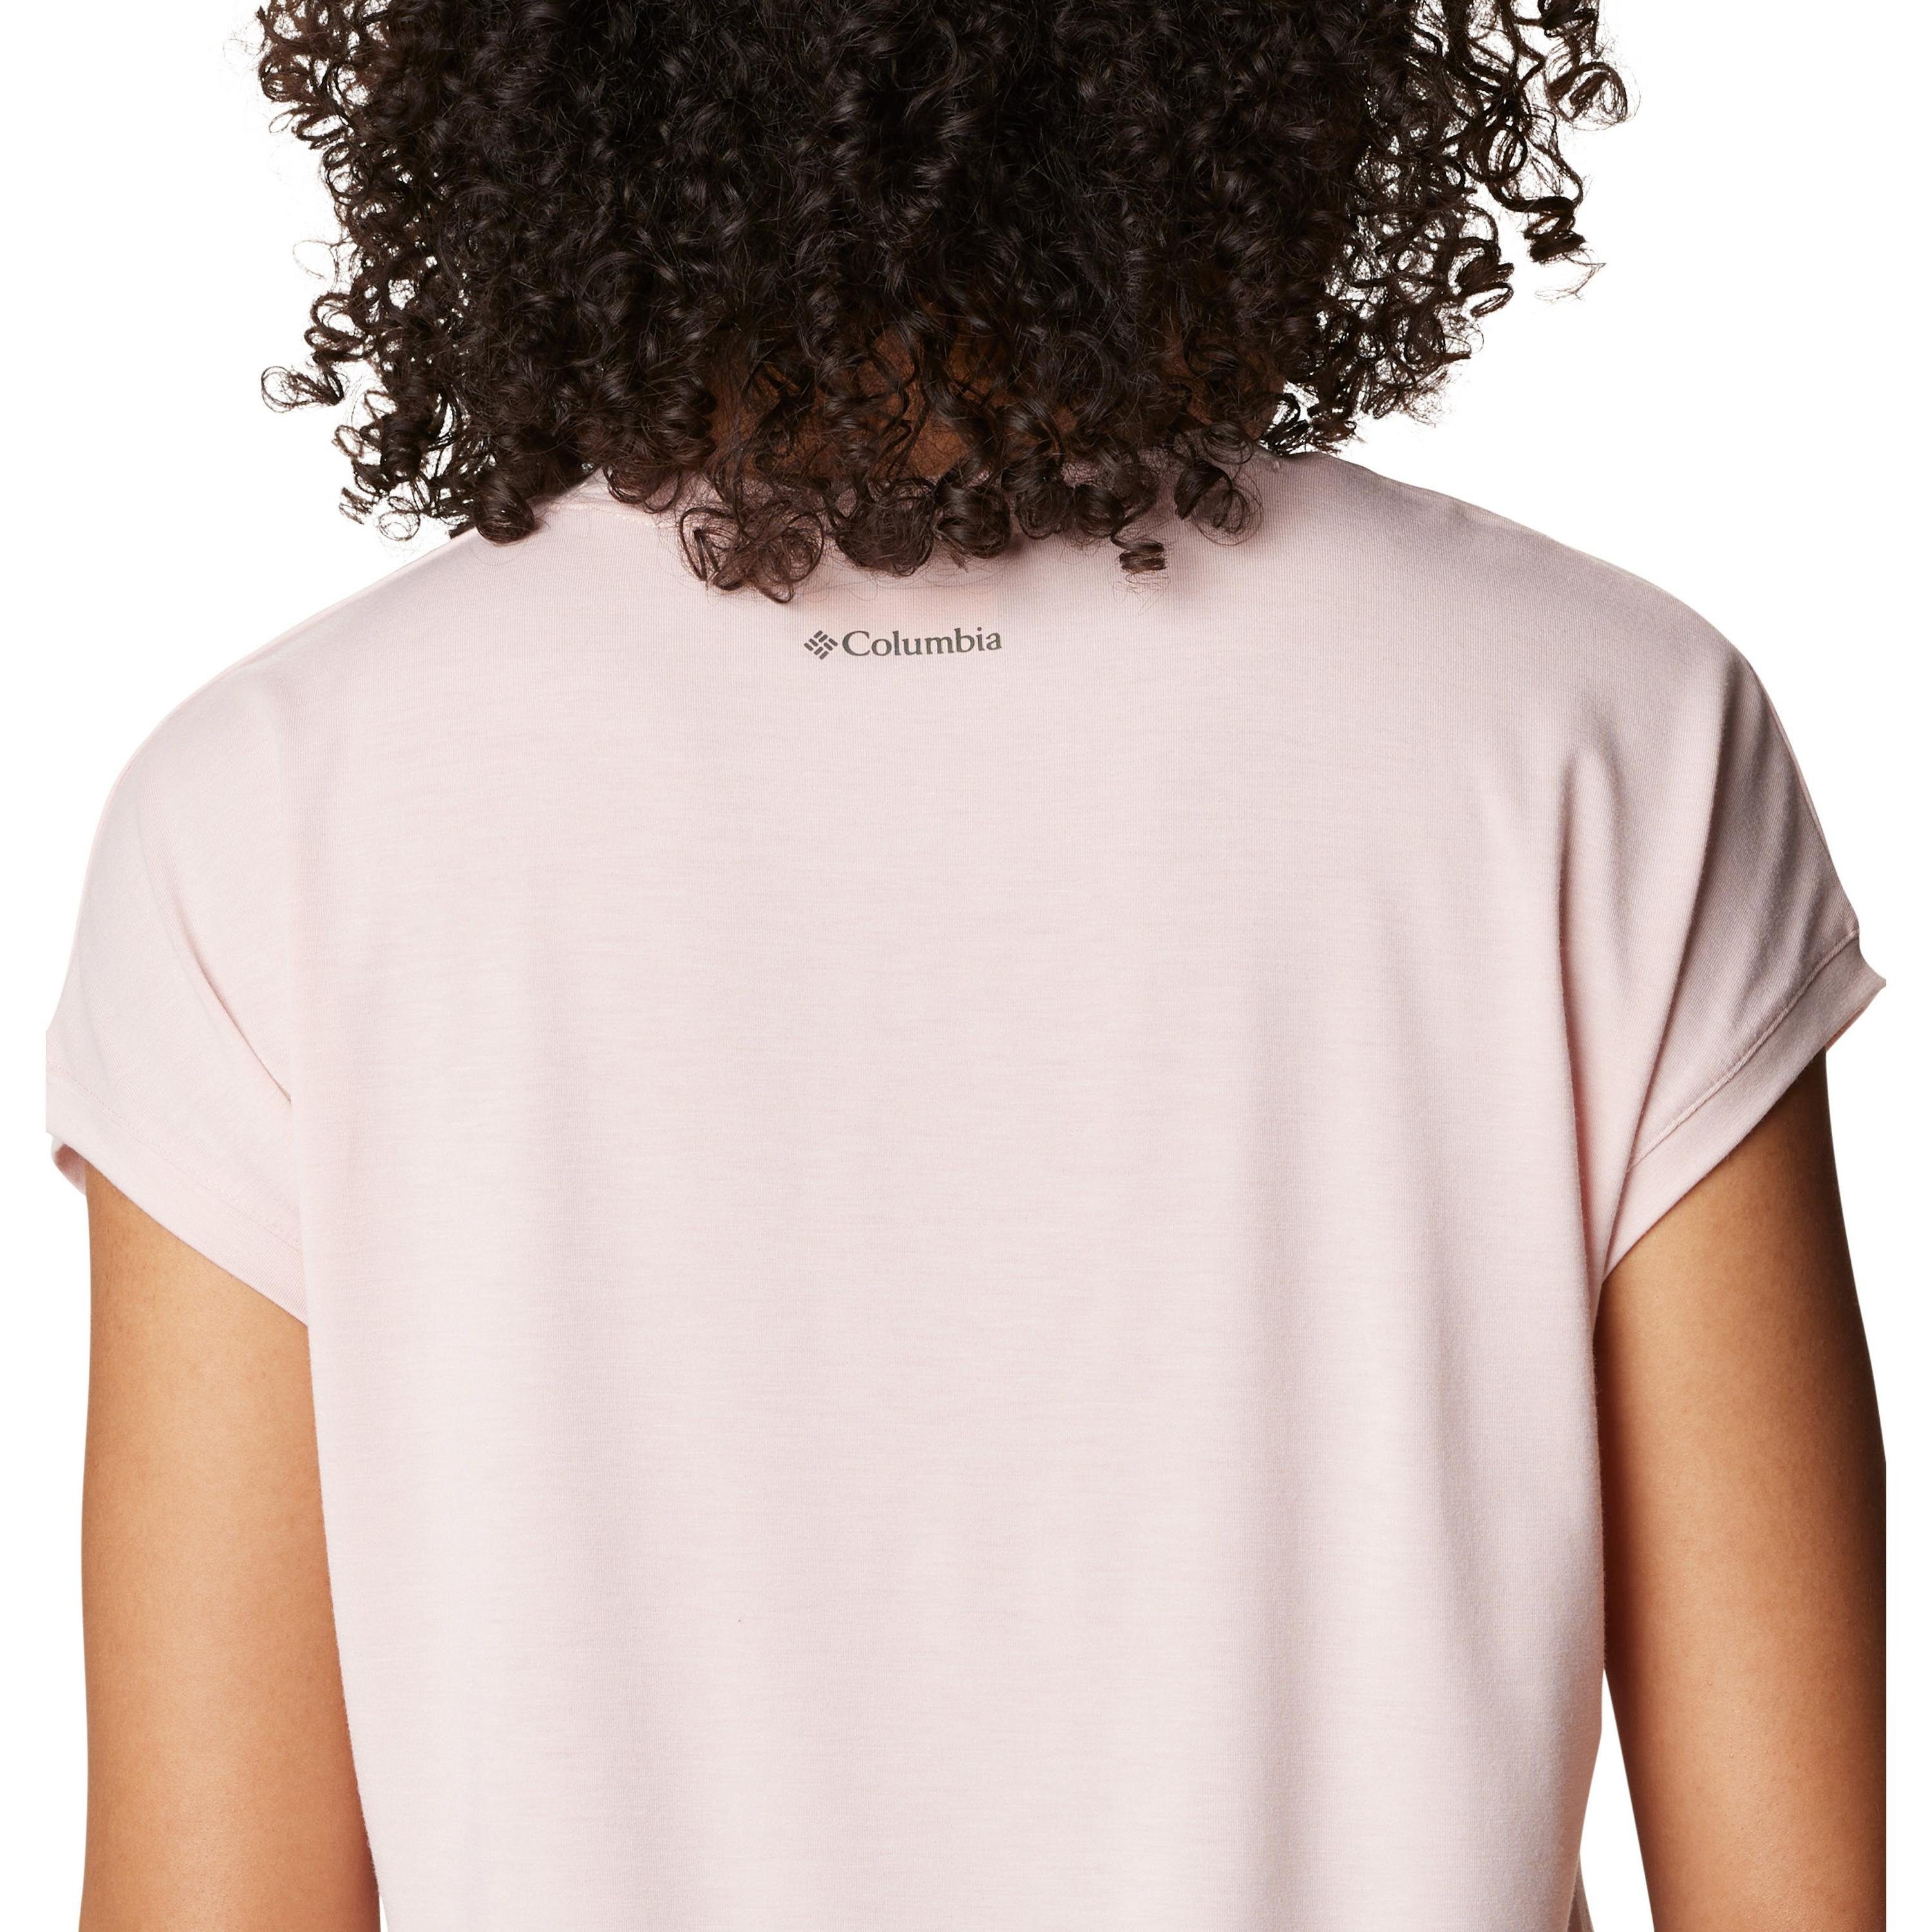 Columbia pink Funktionsshirt Boundless dusty